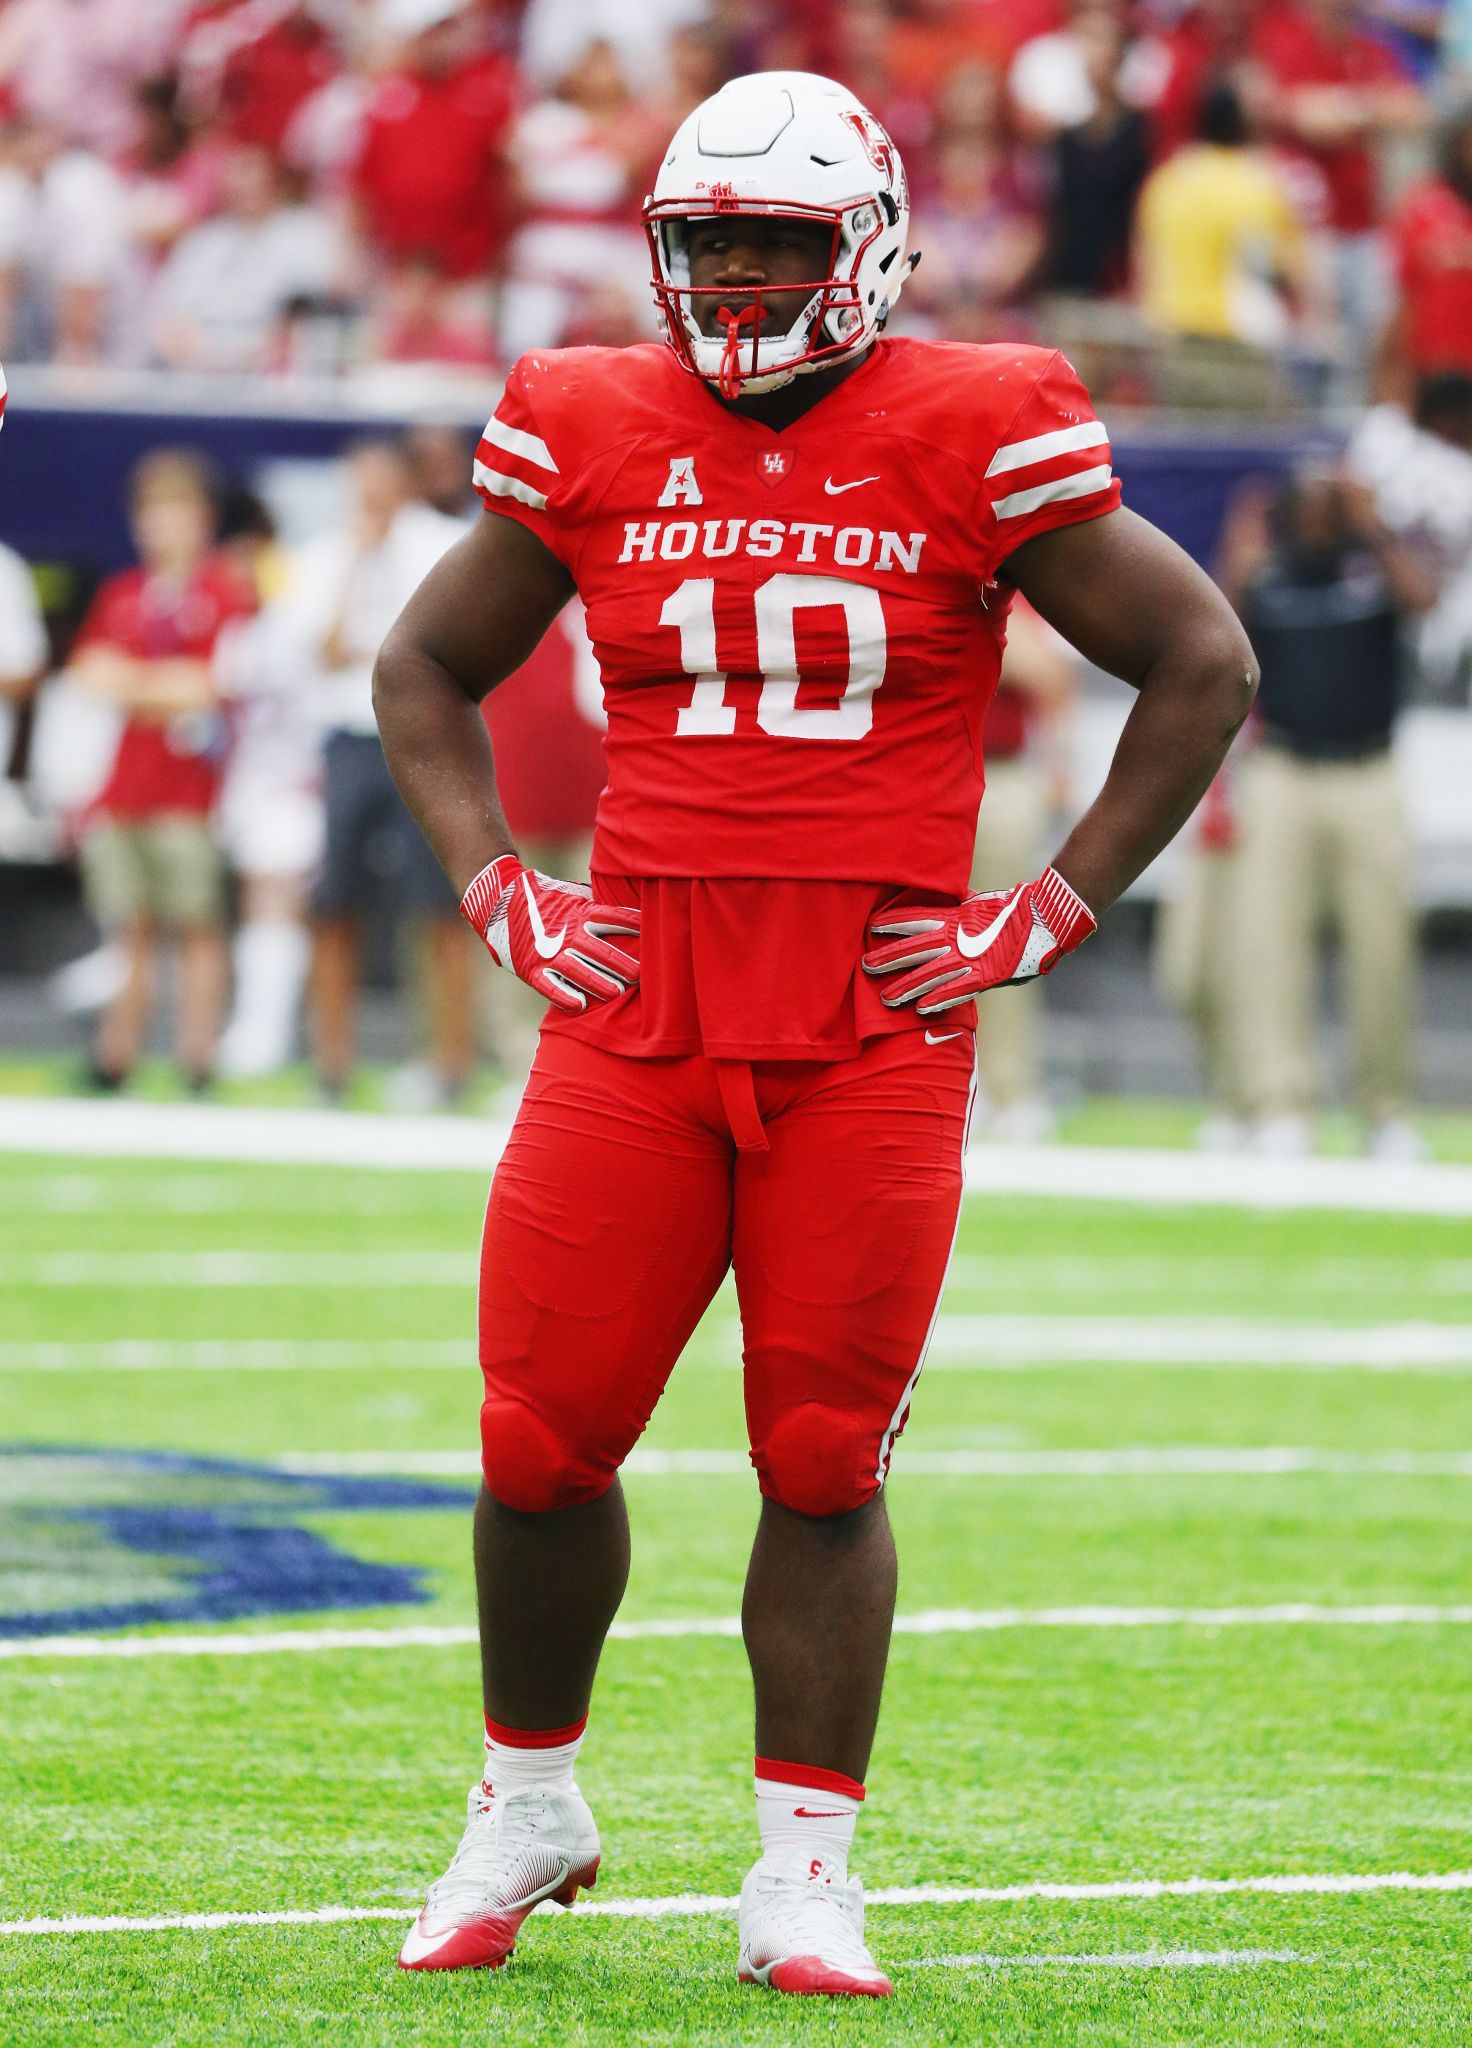 UH's Ed Oliver named to college football award watch lists - Houston Chronicle